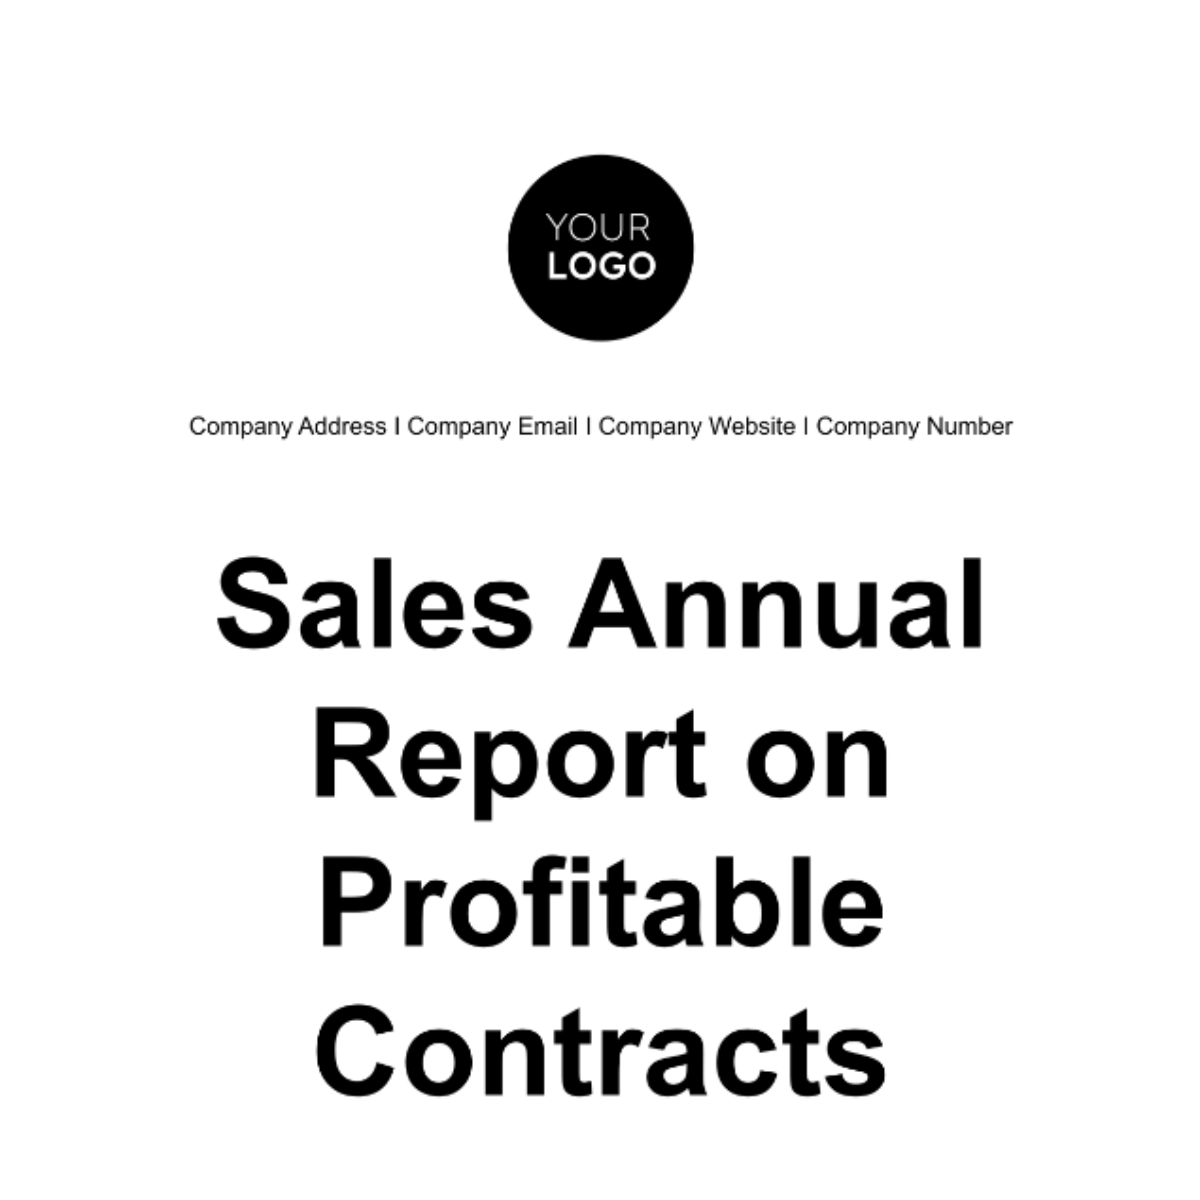 Sales Annual Report on Profitable Contracts Template